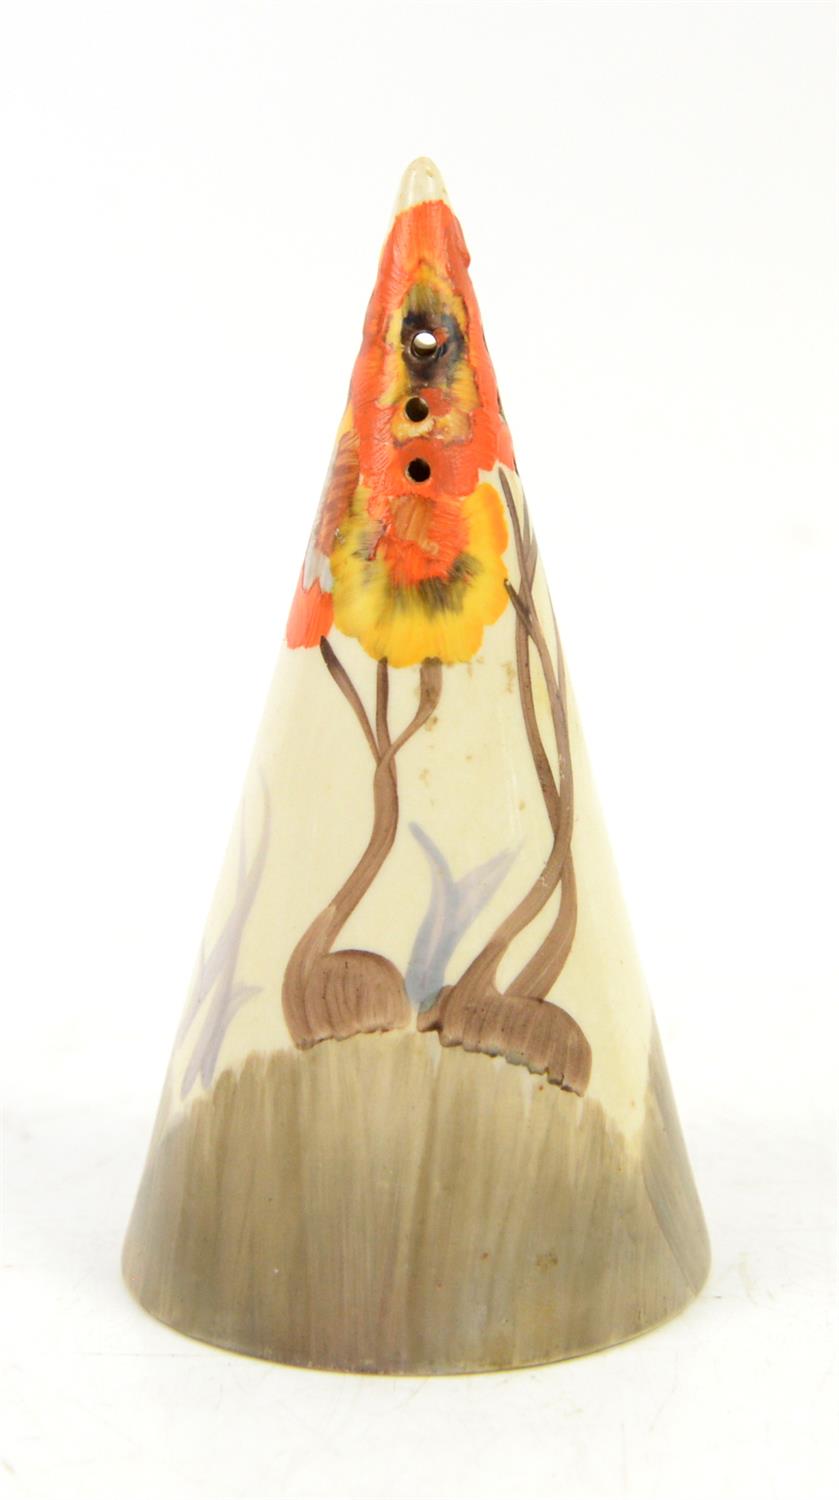 Clarice Cliff Bizarre conical sugar sifter, painted in the "Rhodanthe" pattern, having printed